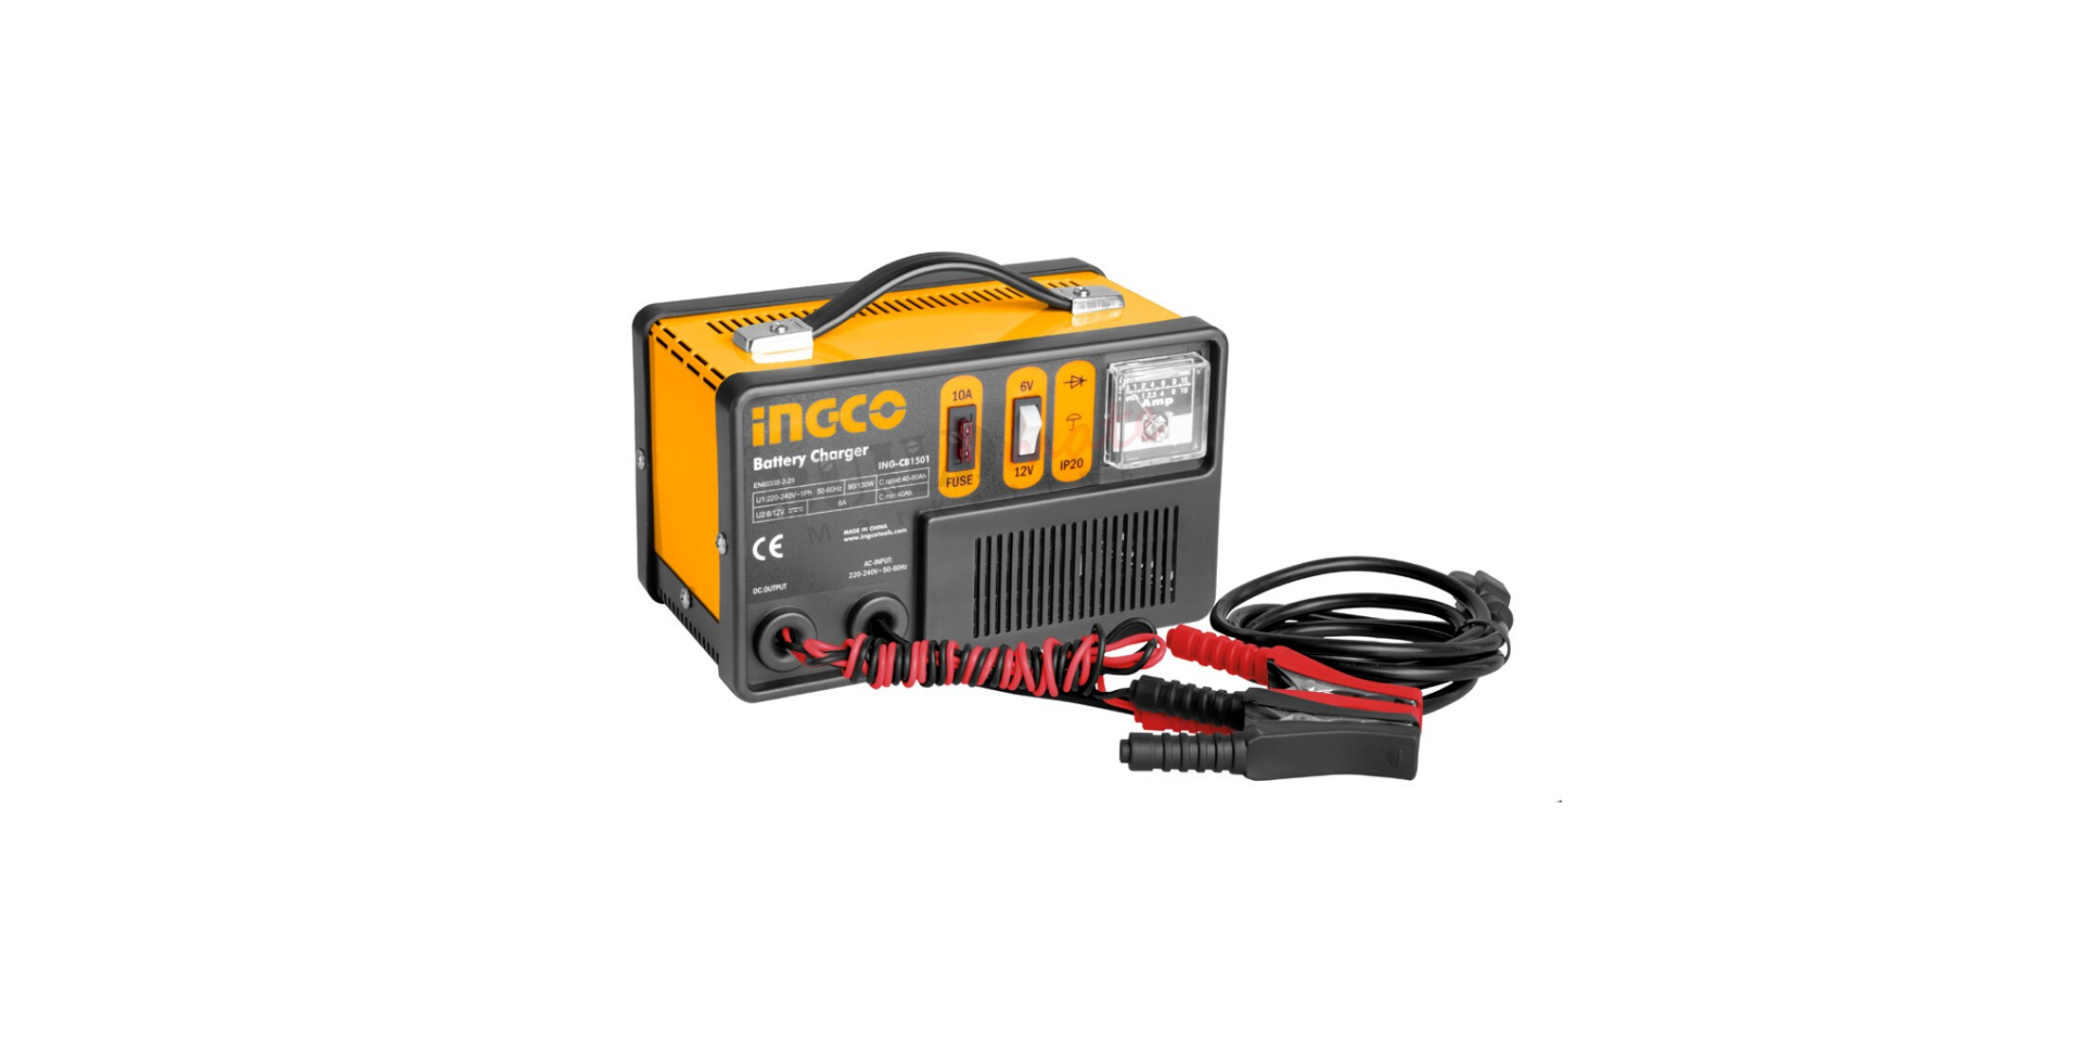 Ingco Ing-Cb1501 Battery Charger